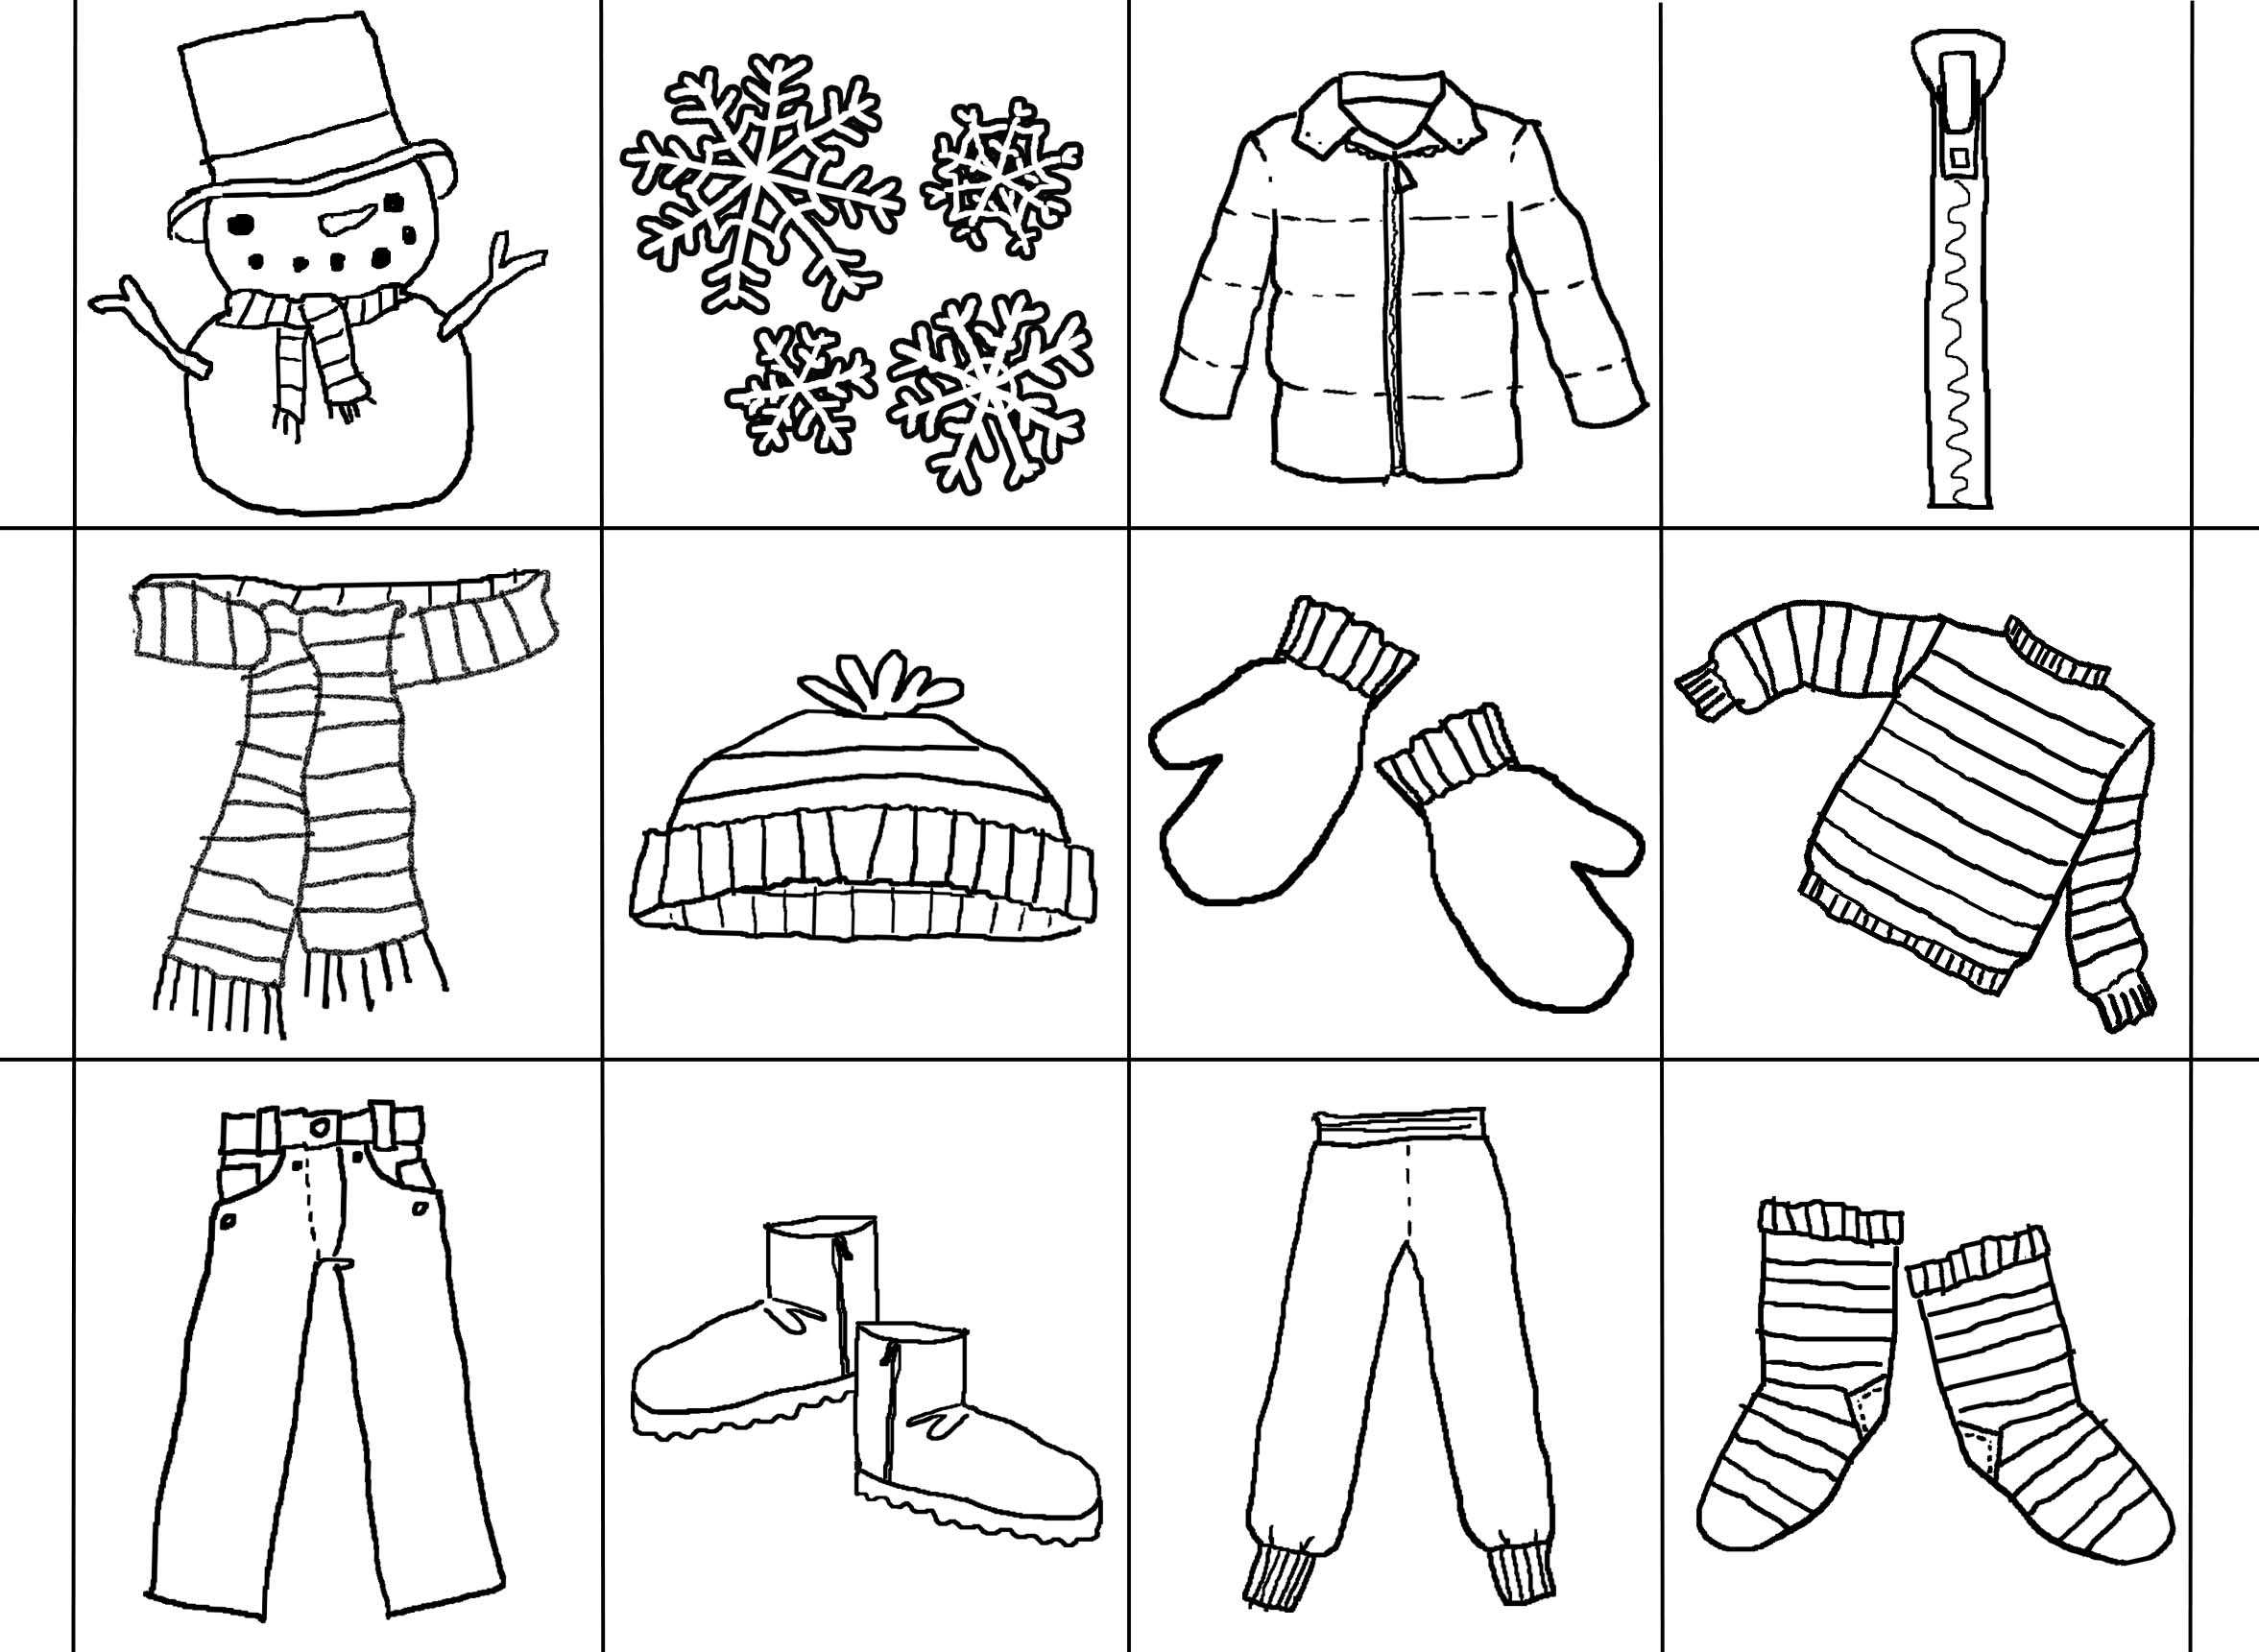 Reproducible Student Worksheet Along with the Jacket I Wear In the Snow Bingo